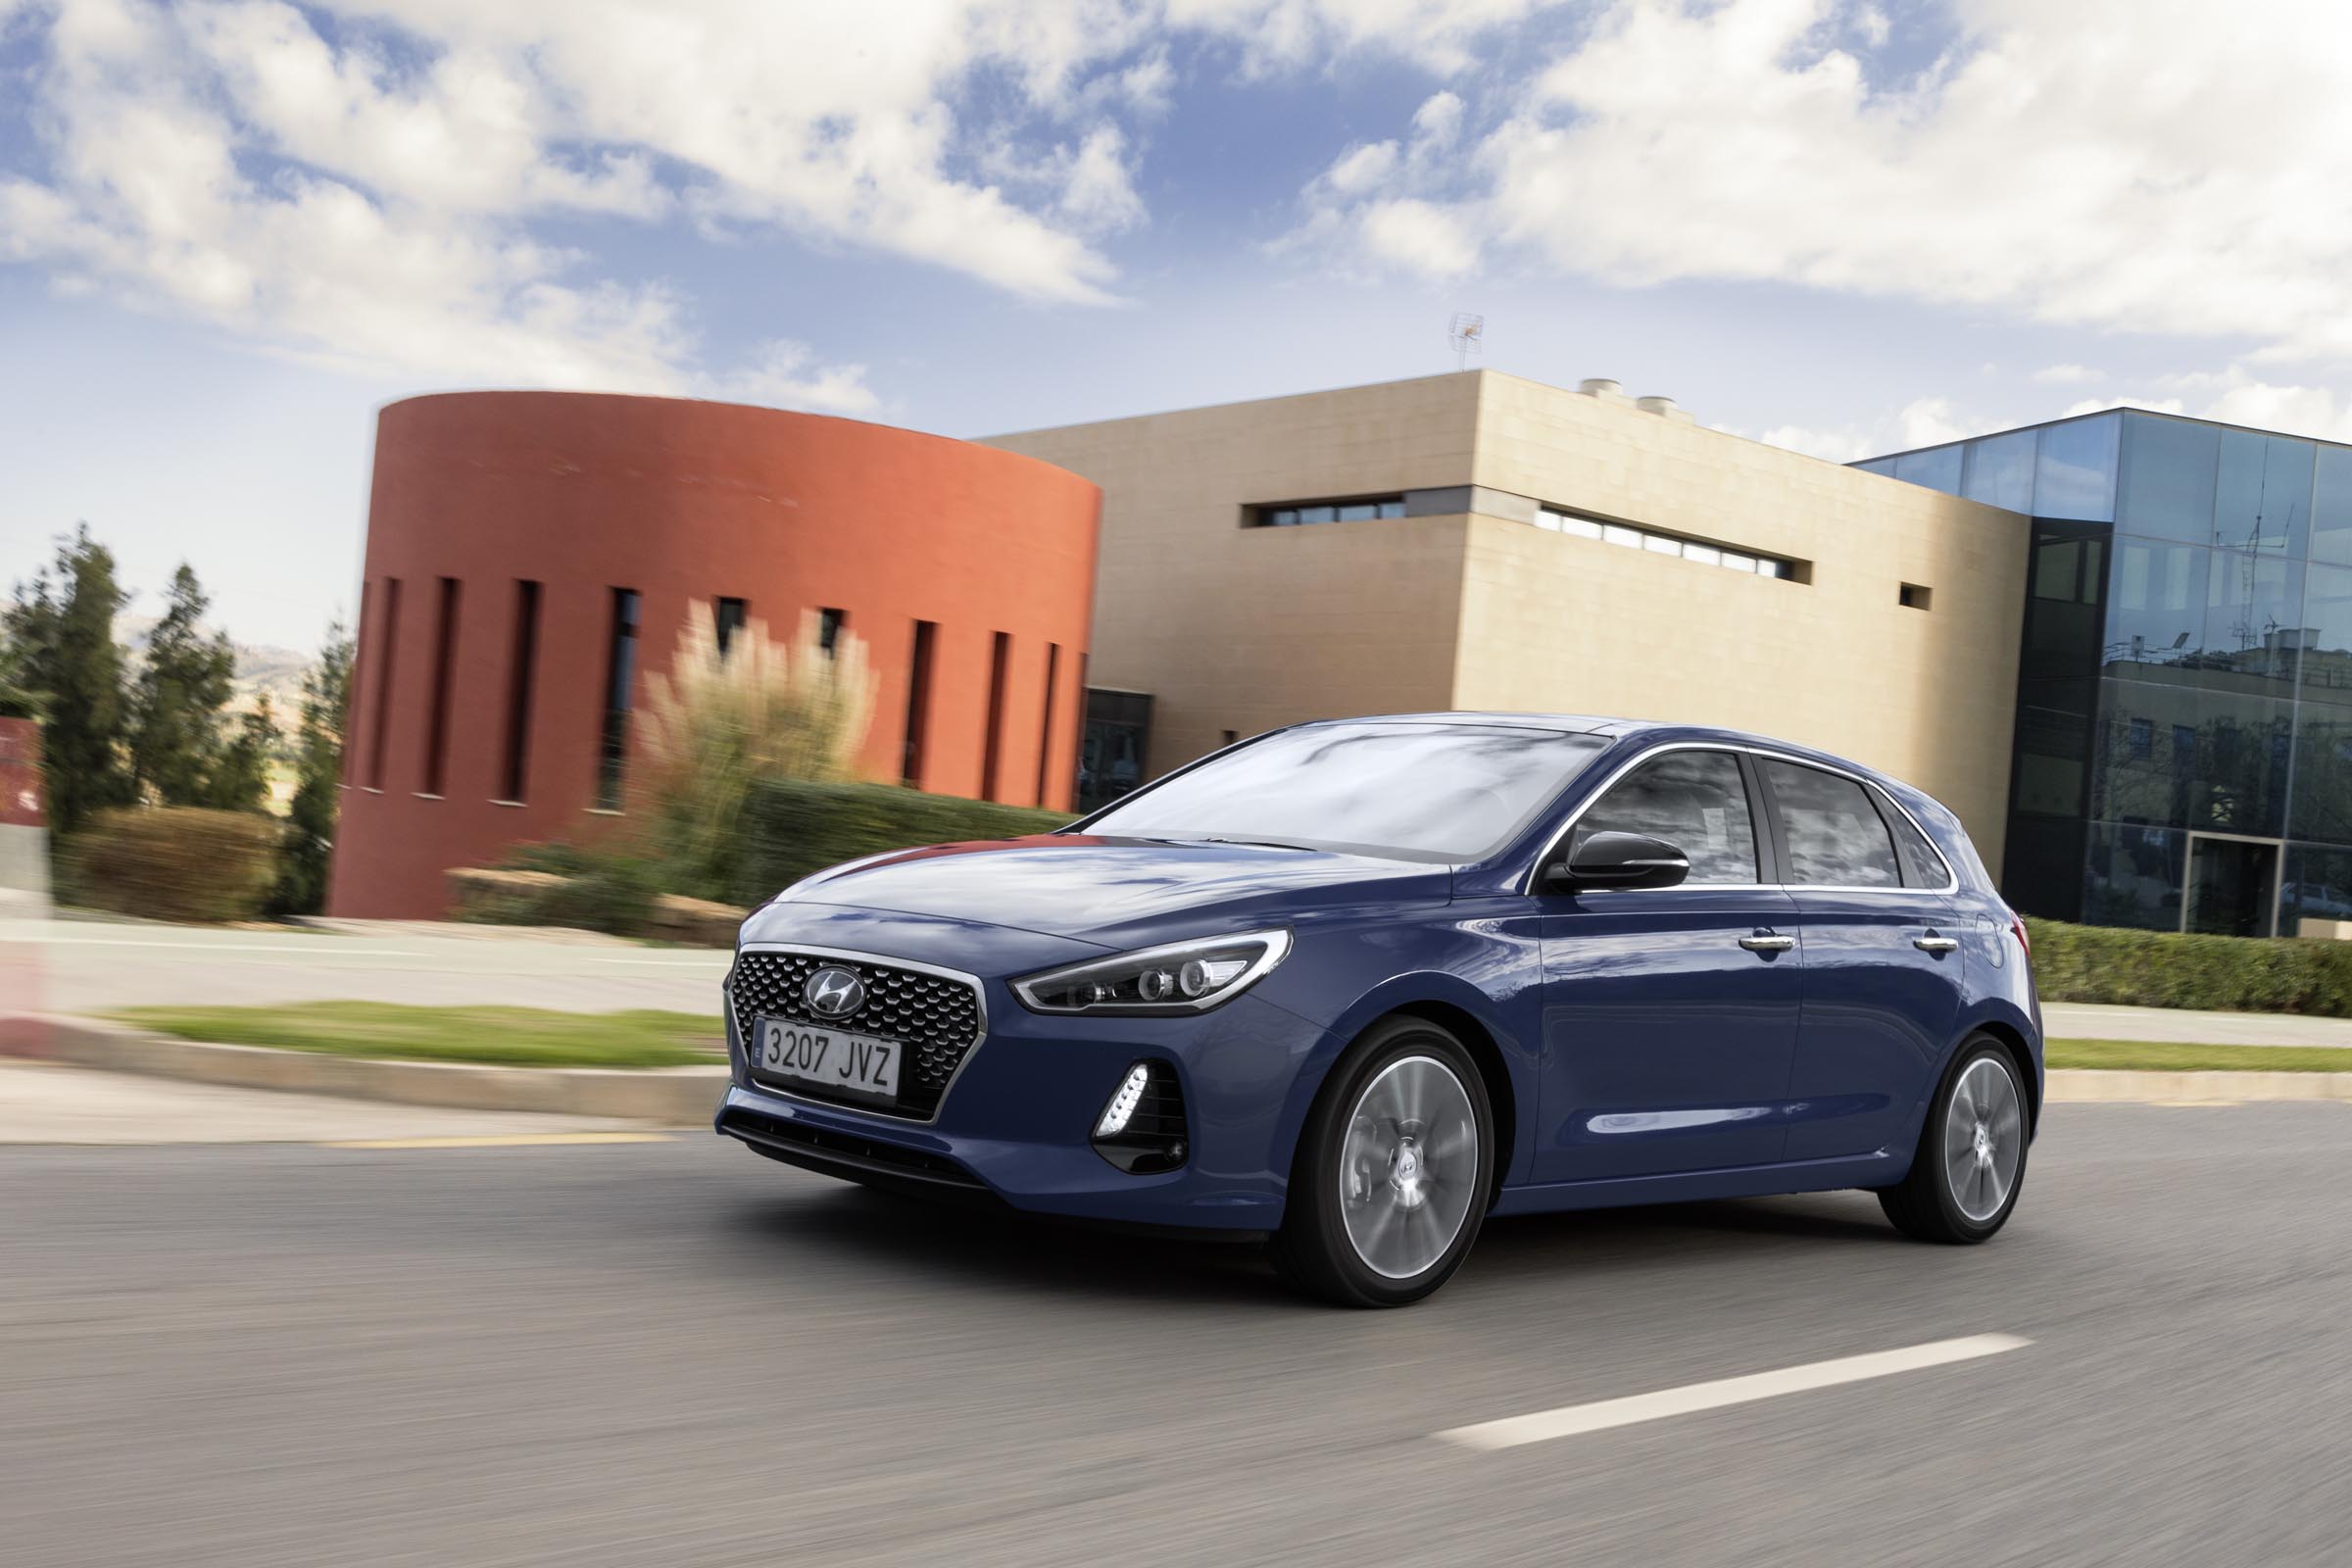 2017 Hyundai i30 hatchback pictures Carbuyer